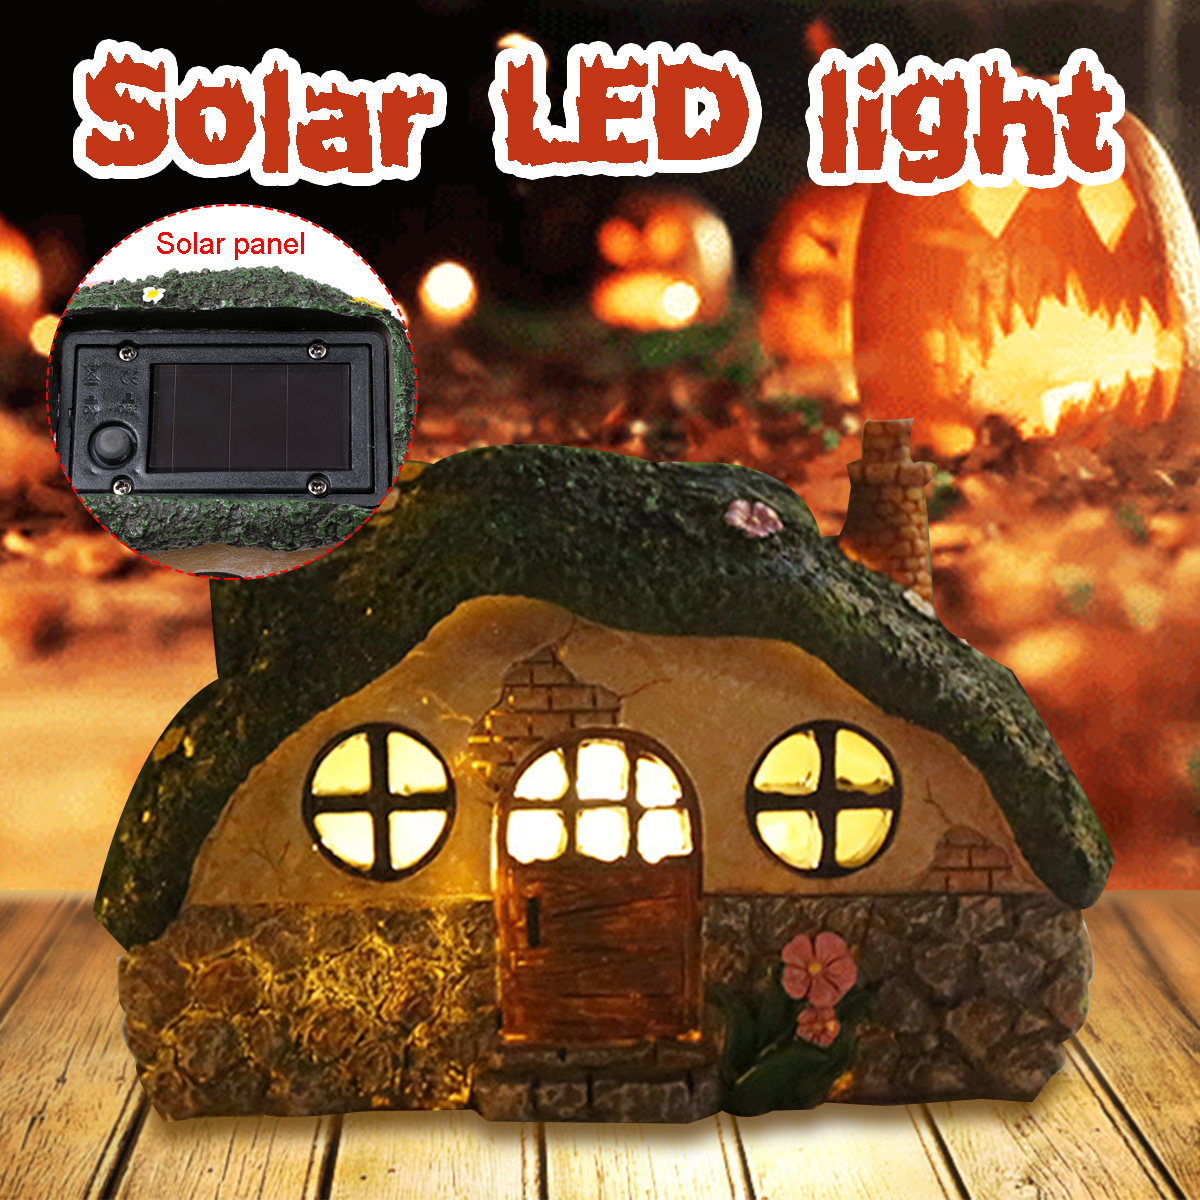 Solar-LED-Decorative-Light-Small-Fairy-House-Lawn-Roof-Outdoor-Waterproof-Garden-Decoration-Light-1725783-1